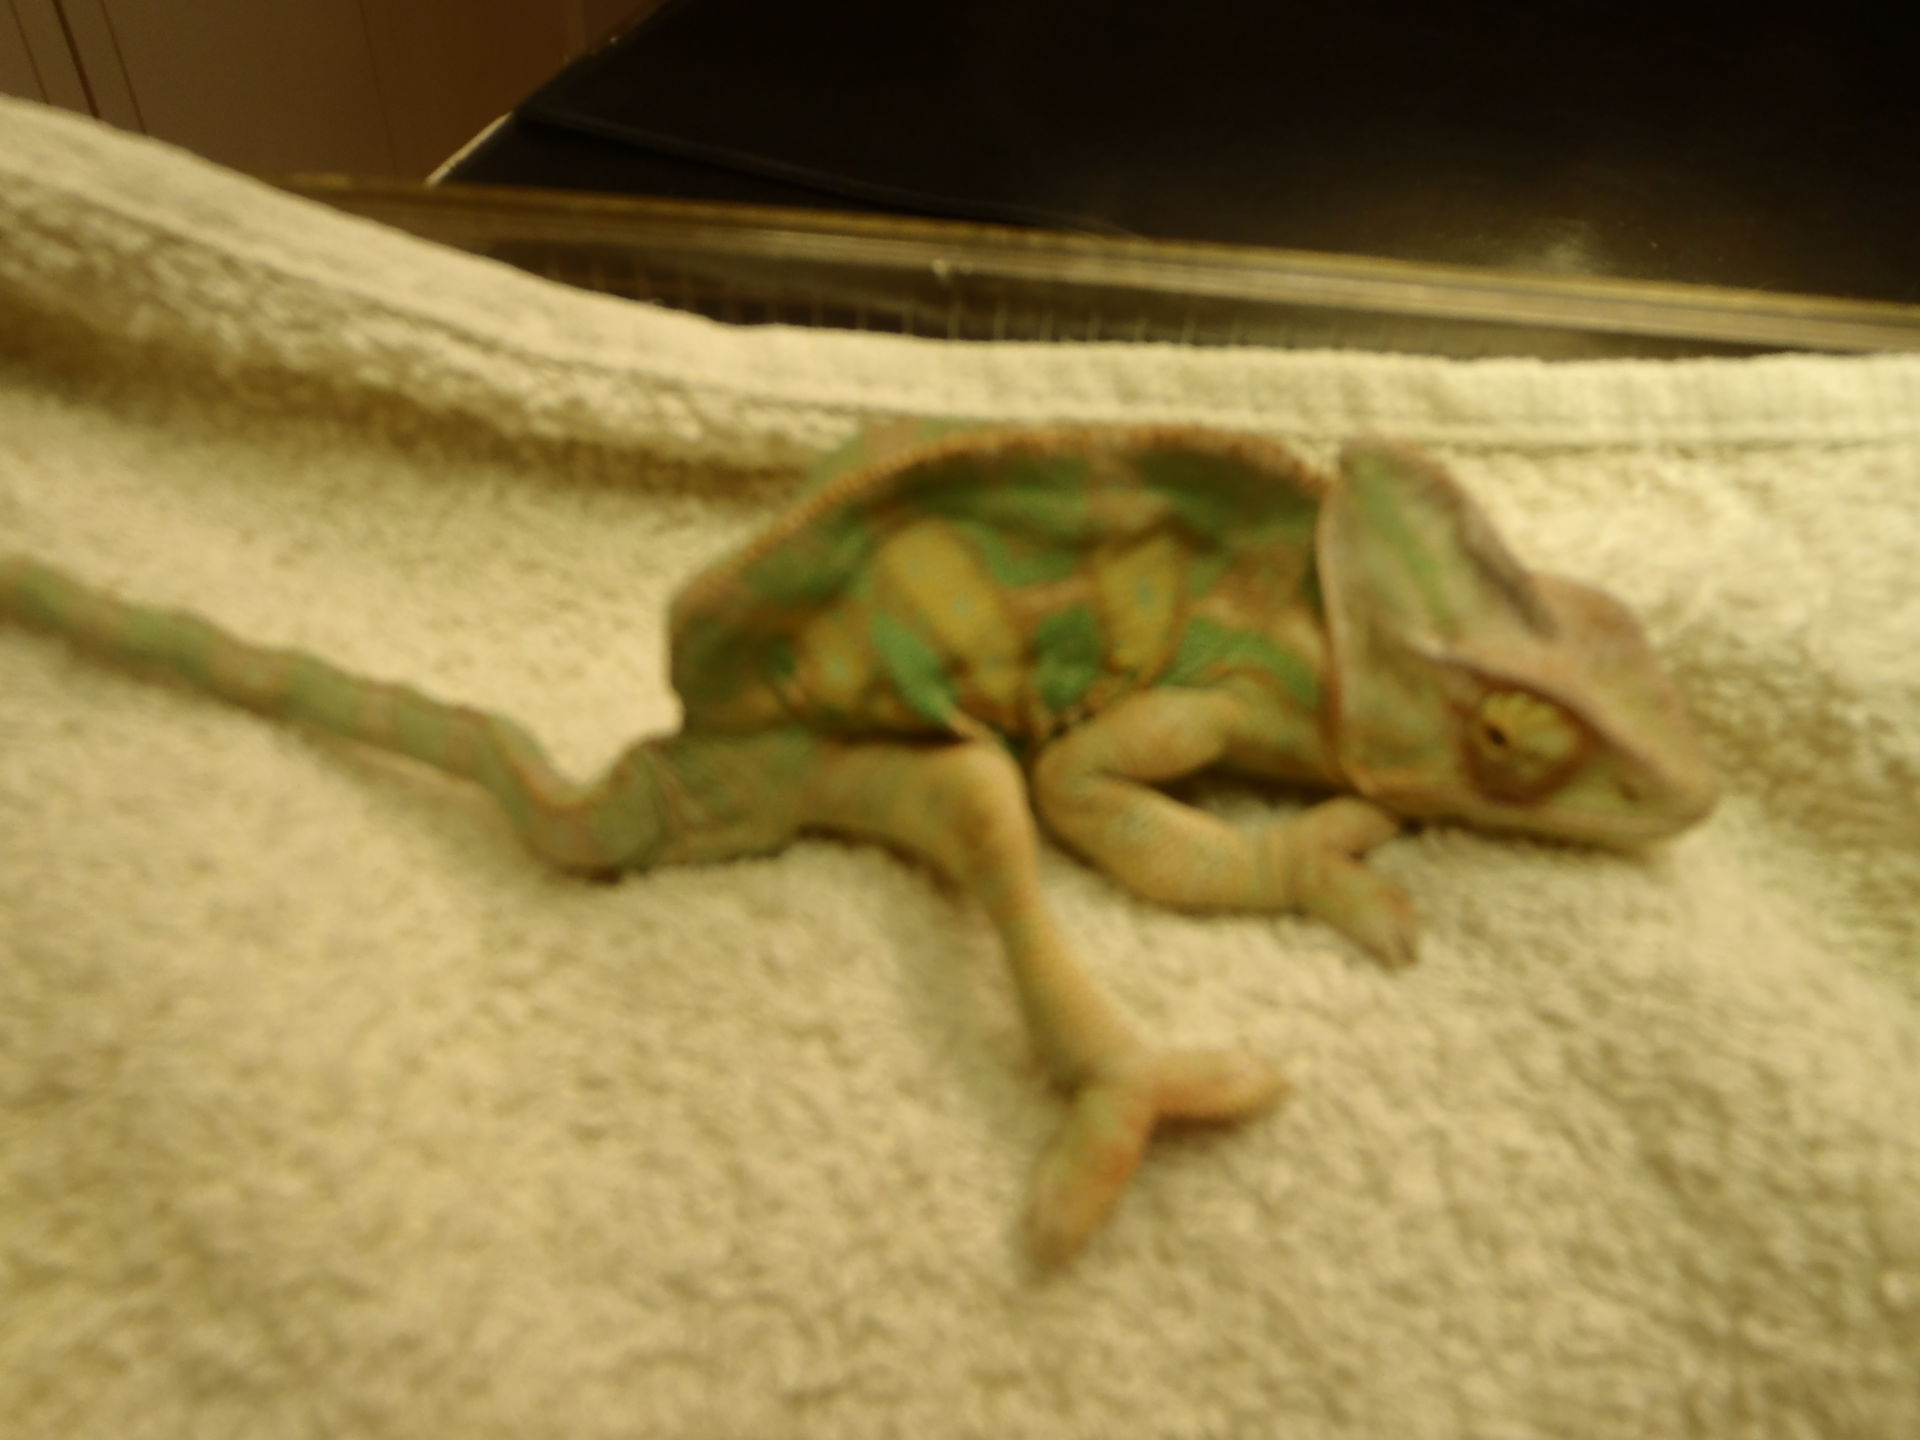 Rickets in a juvenile Chameleon (2)